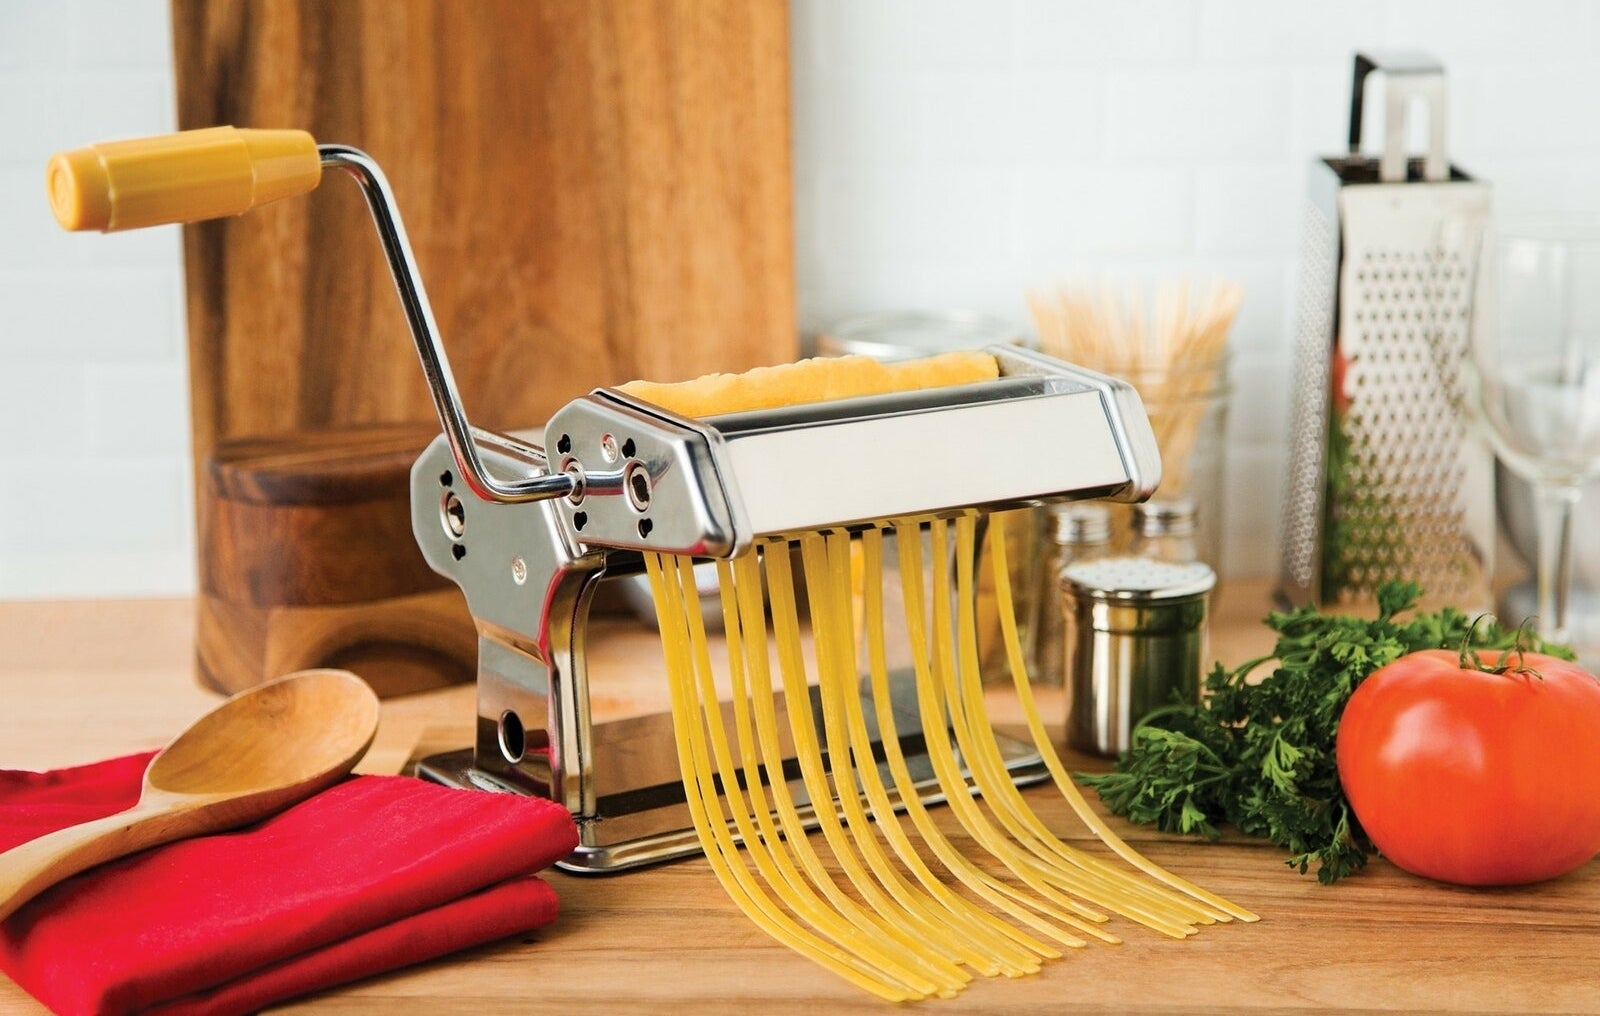 Stainless steel pasta maker on a kitchen counter.